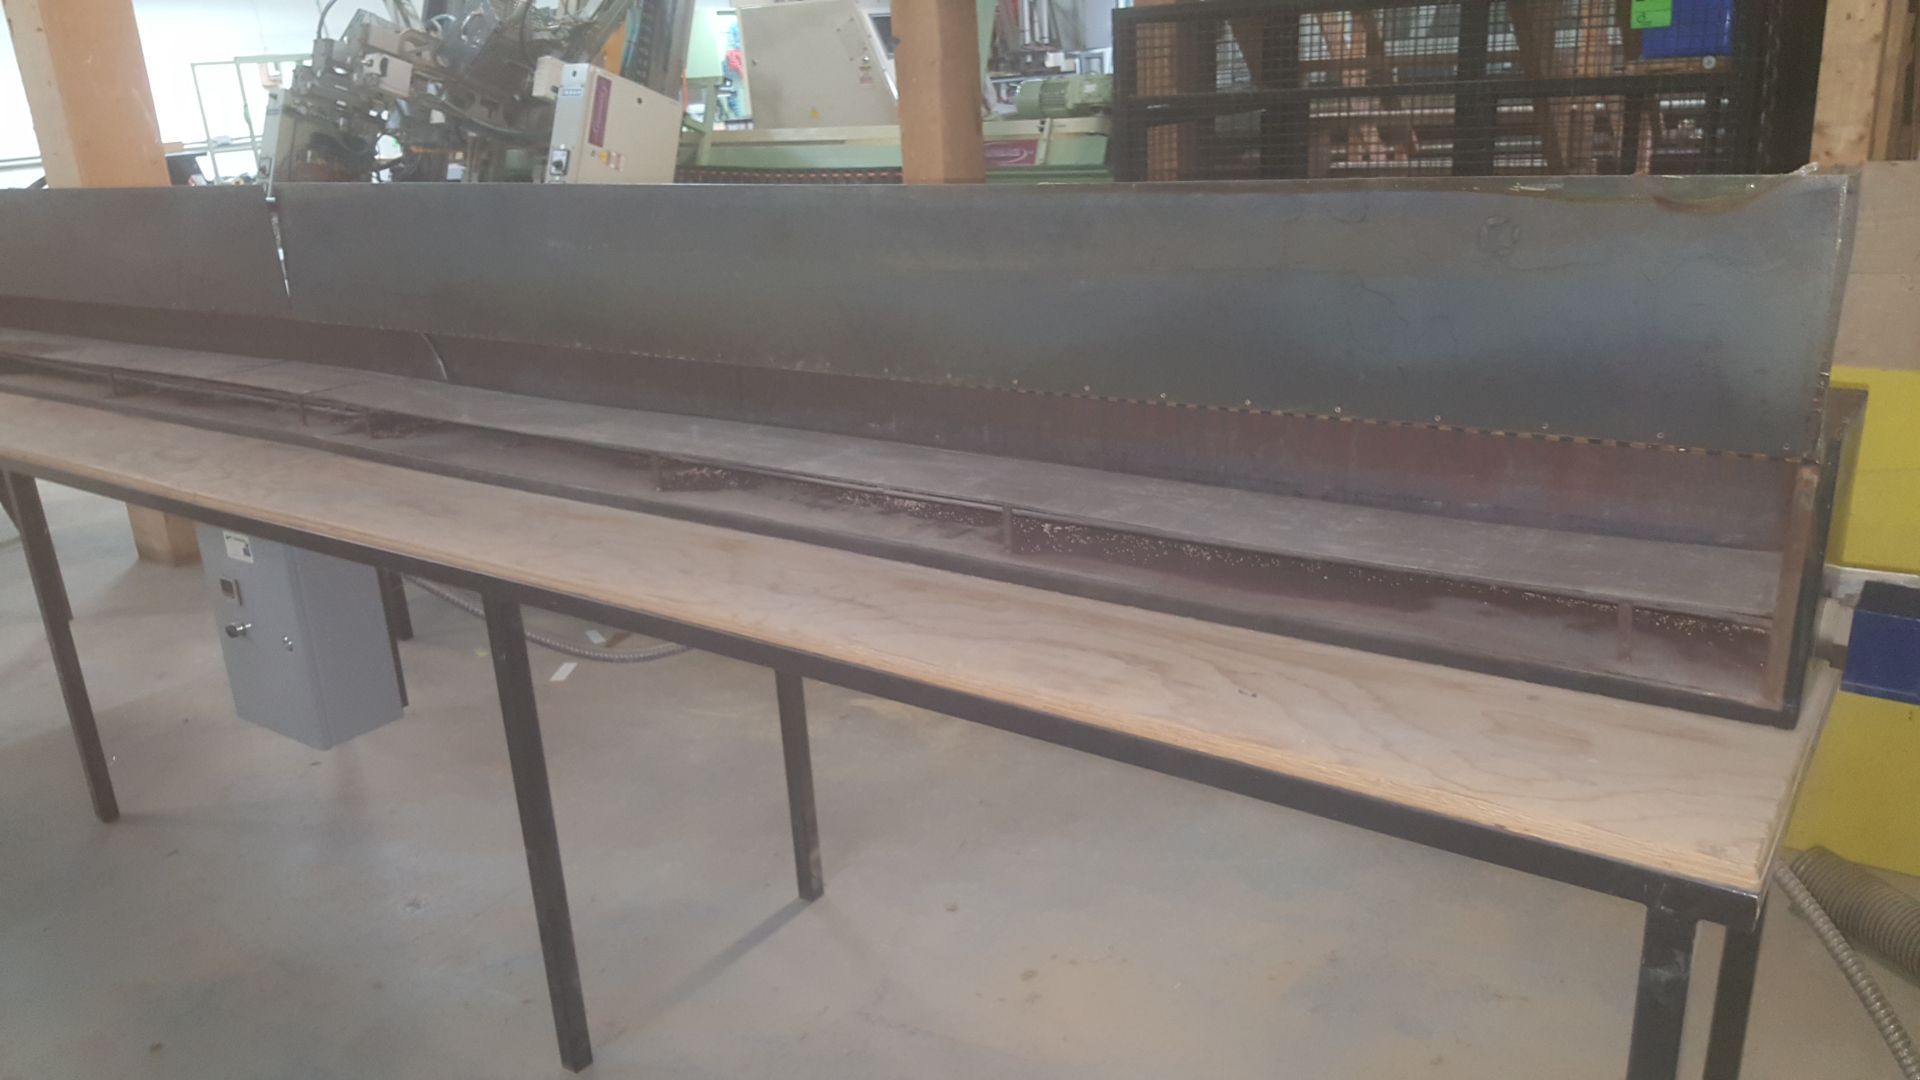 PVC Heater/Bender Oven on steel table. Dimensions including Oven and Base are 192"x24"x53"H - Image 8 of 8